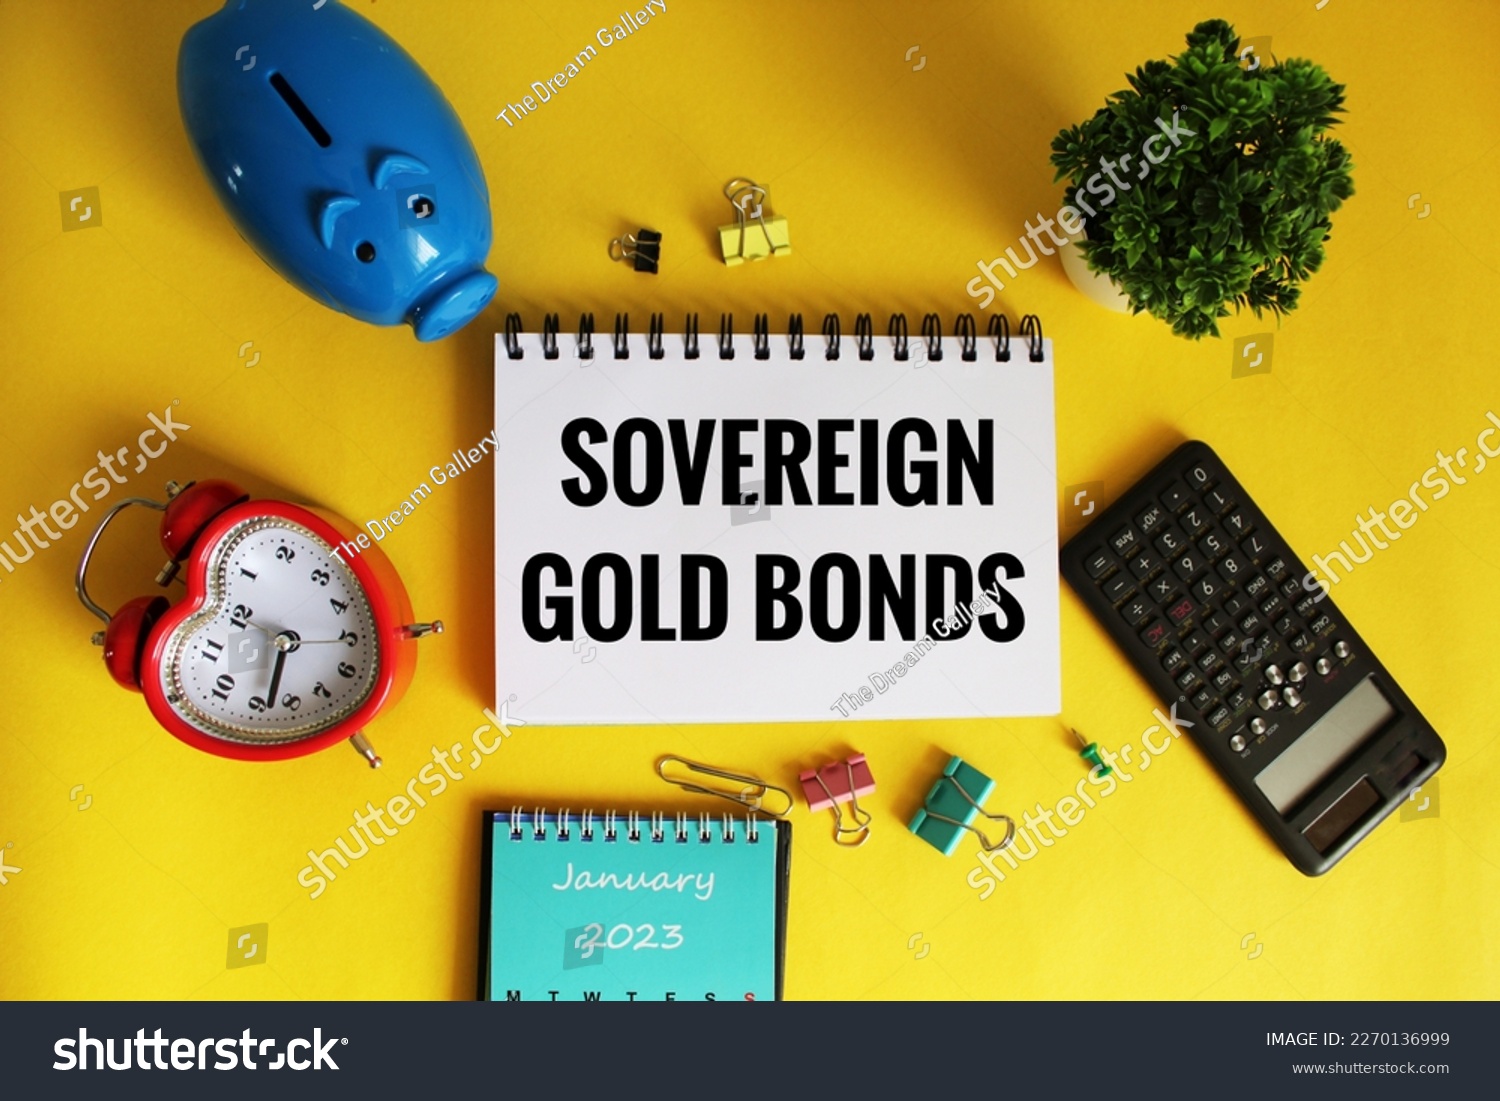 Sovereign gold Bonds Concept on open notepad on office wooden table with different stationery.  #2270136999